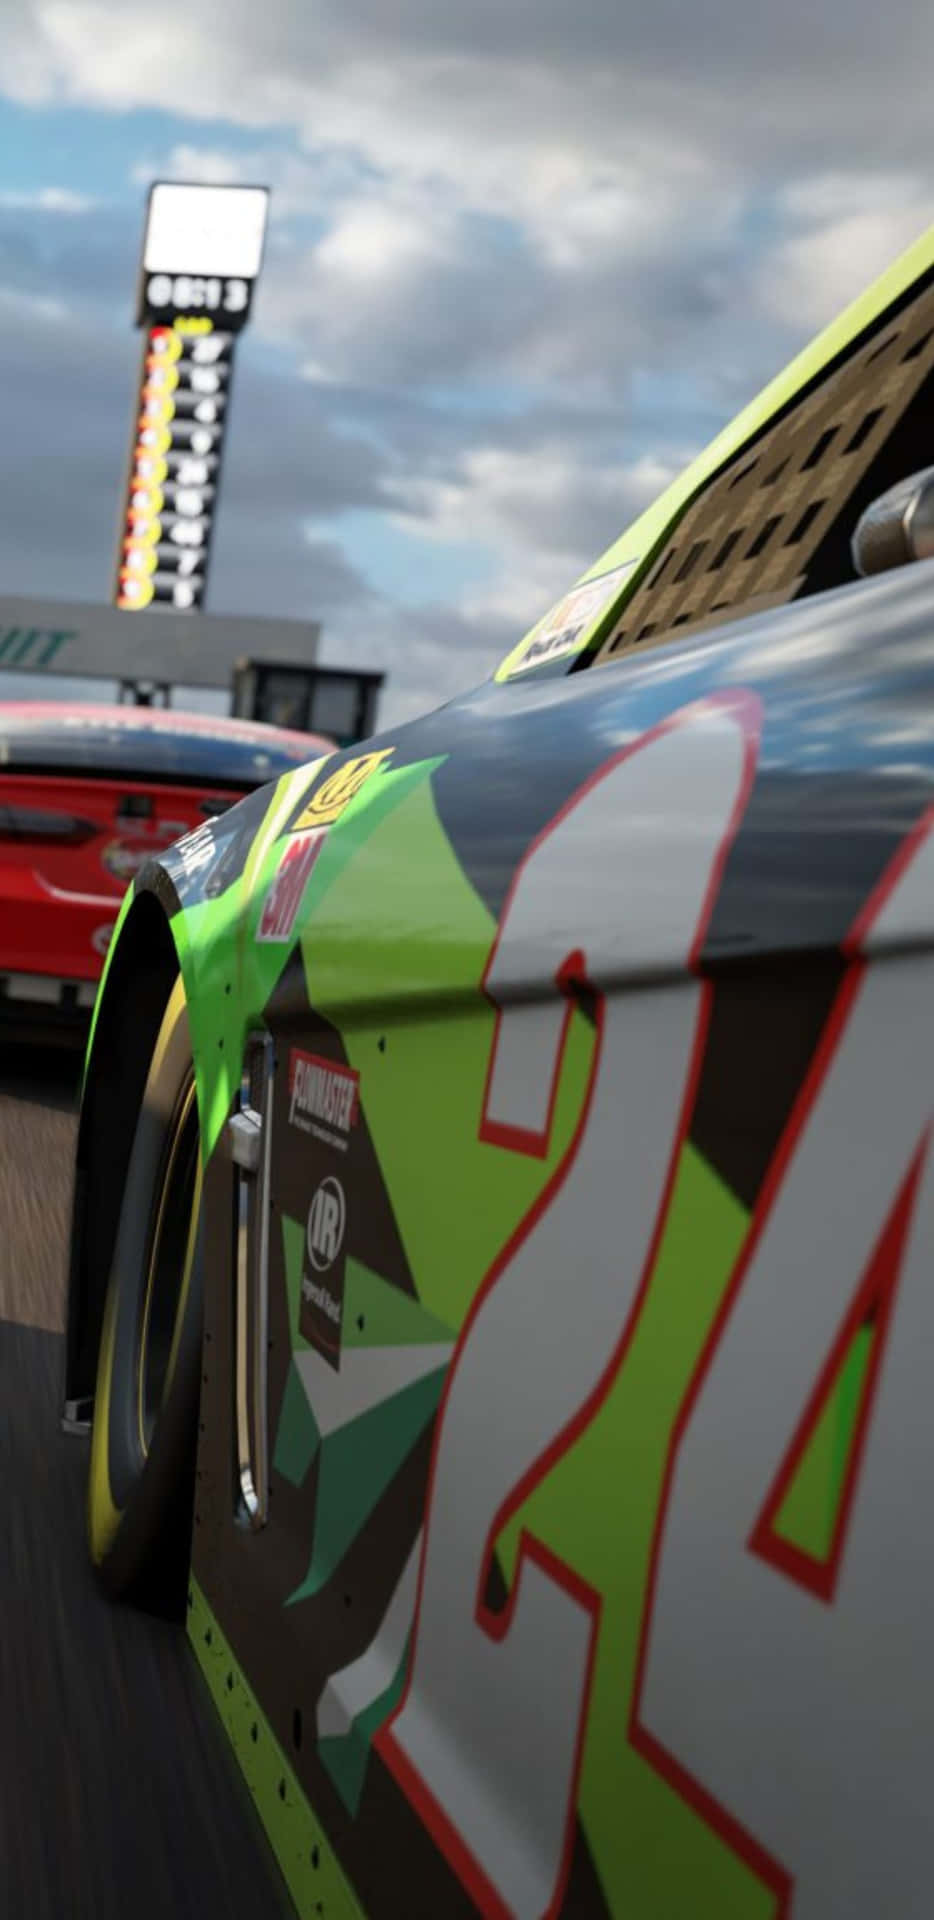 Experience the Thrill of Racing with the Pixel 3XL and Forza Motorsport 7